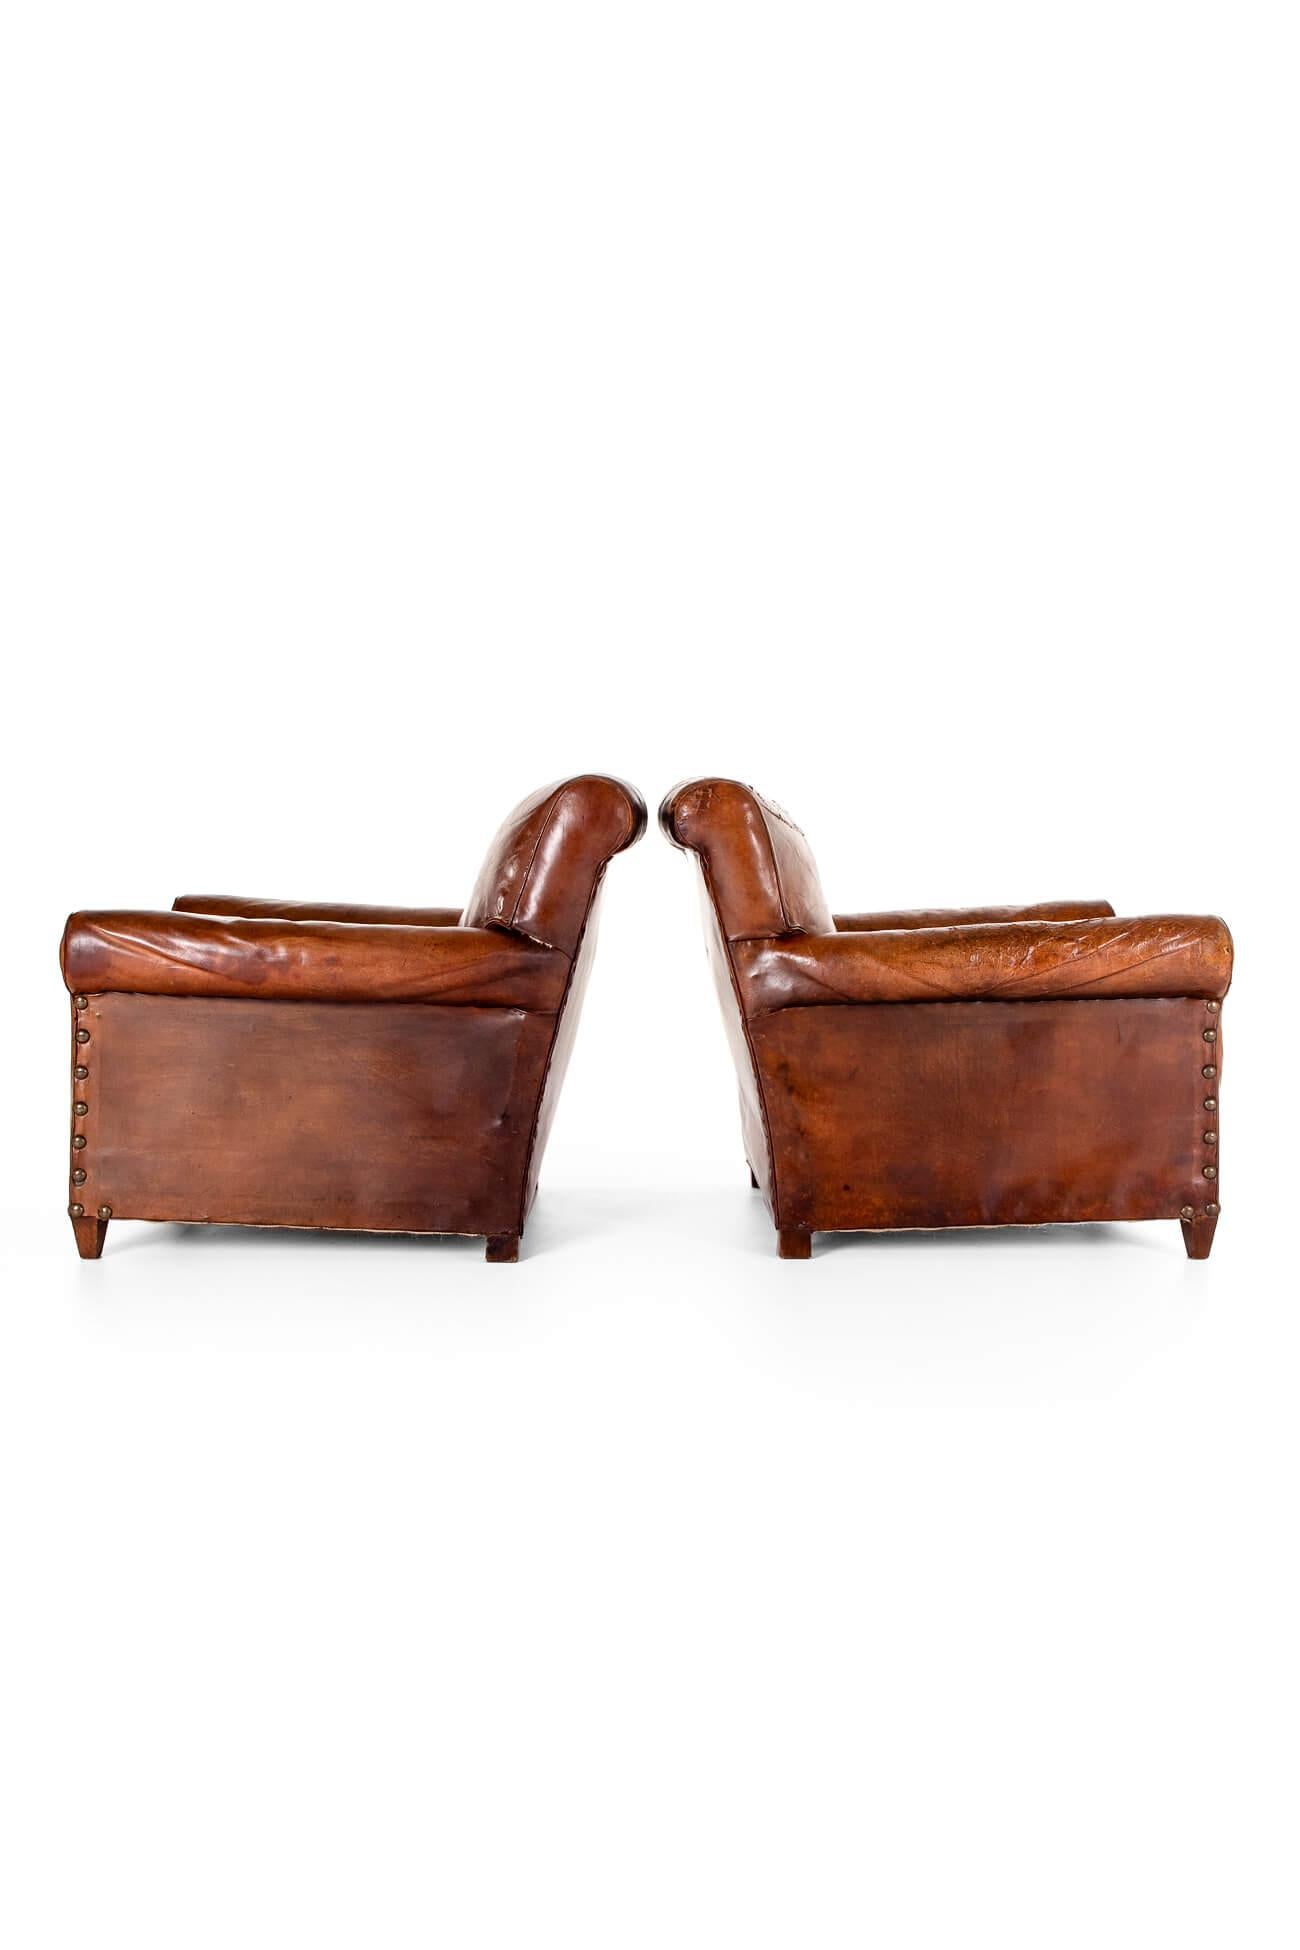 Art Deco Pair of French Leather Club Chairs